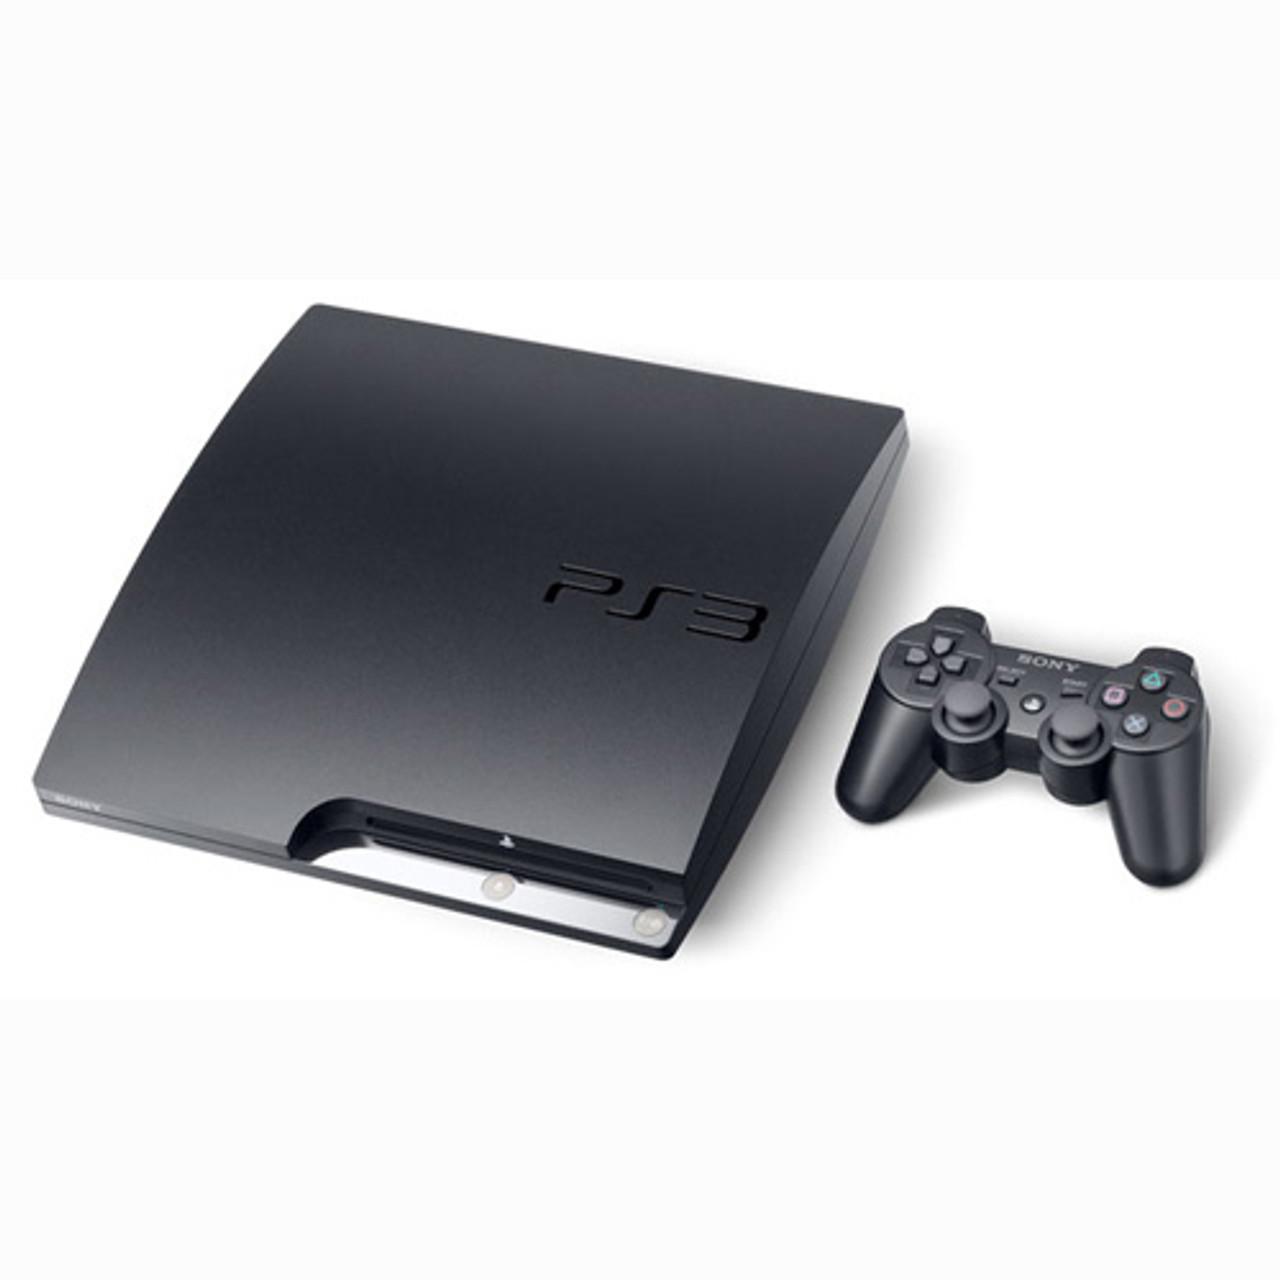 Playstation PS3 Slim 120GB System Console For Sale |